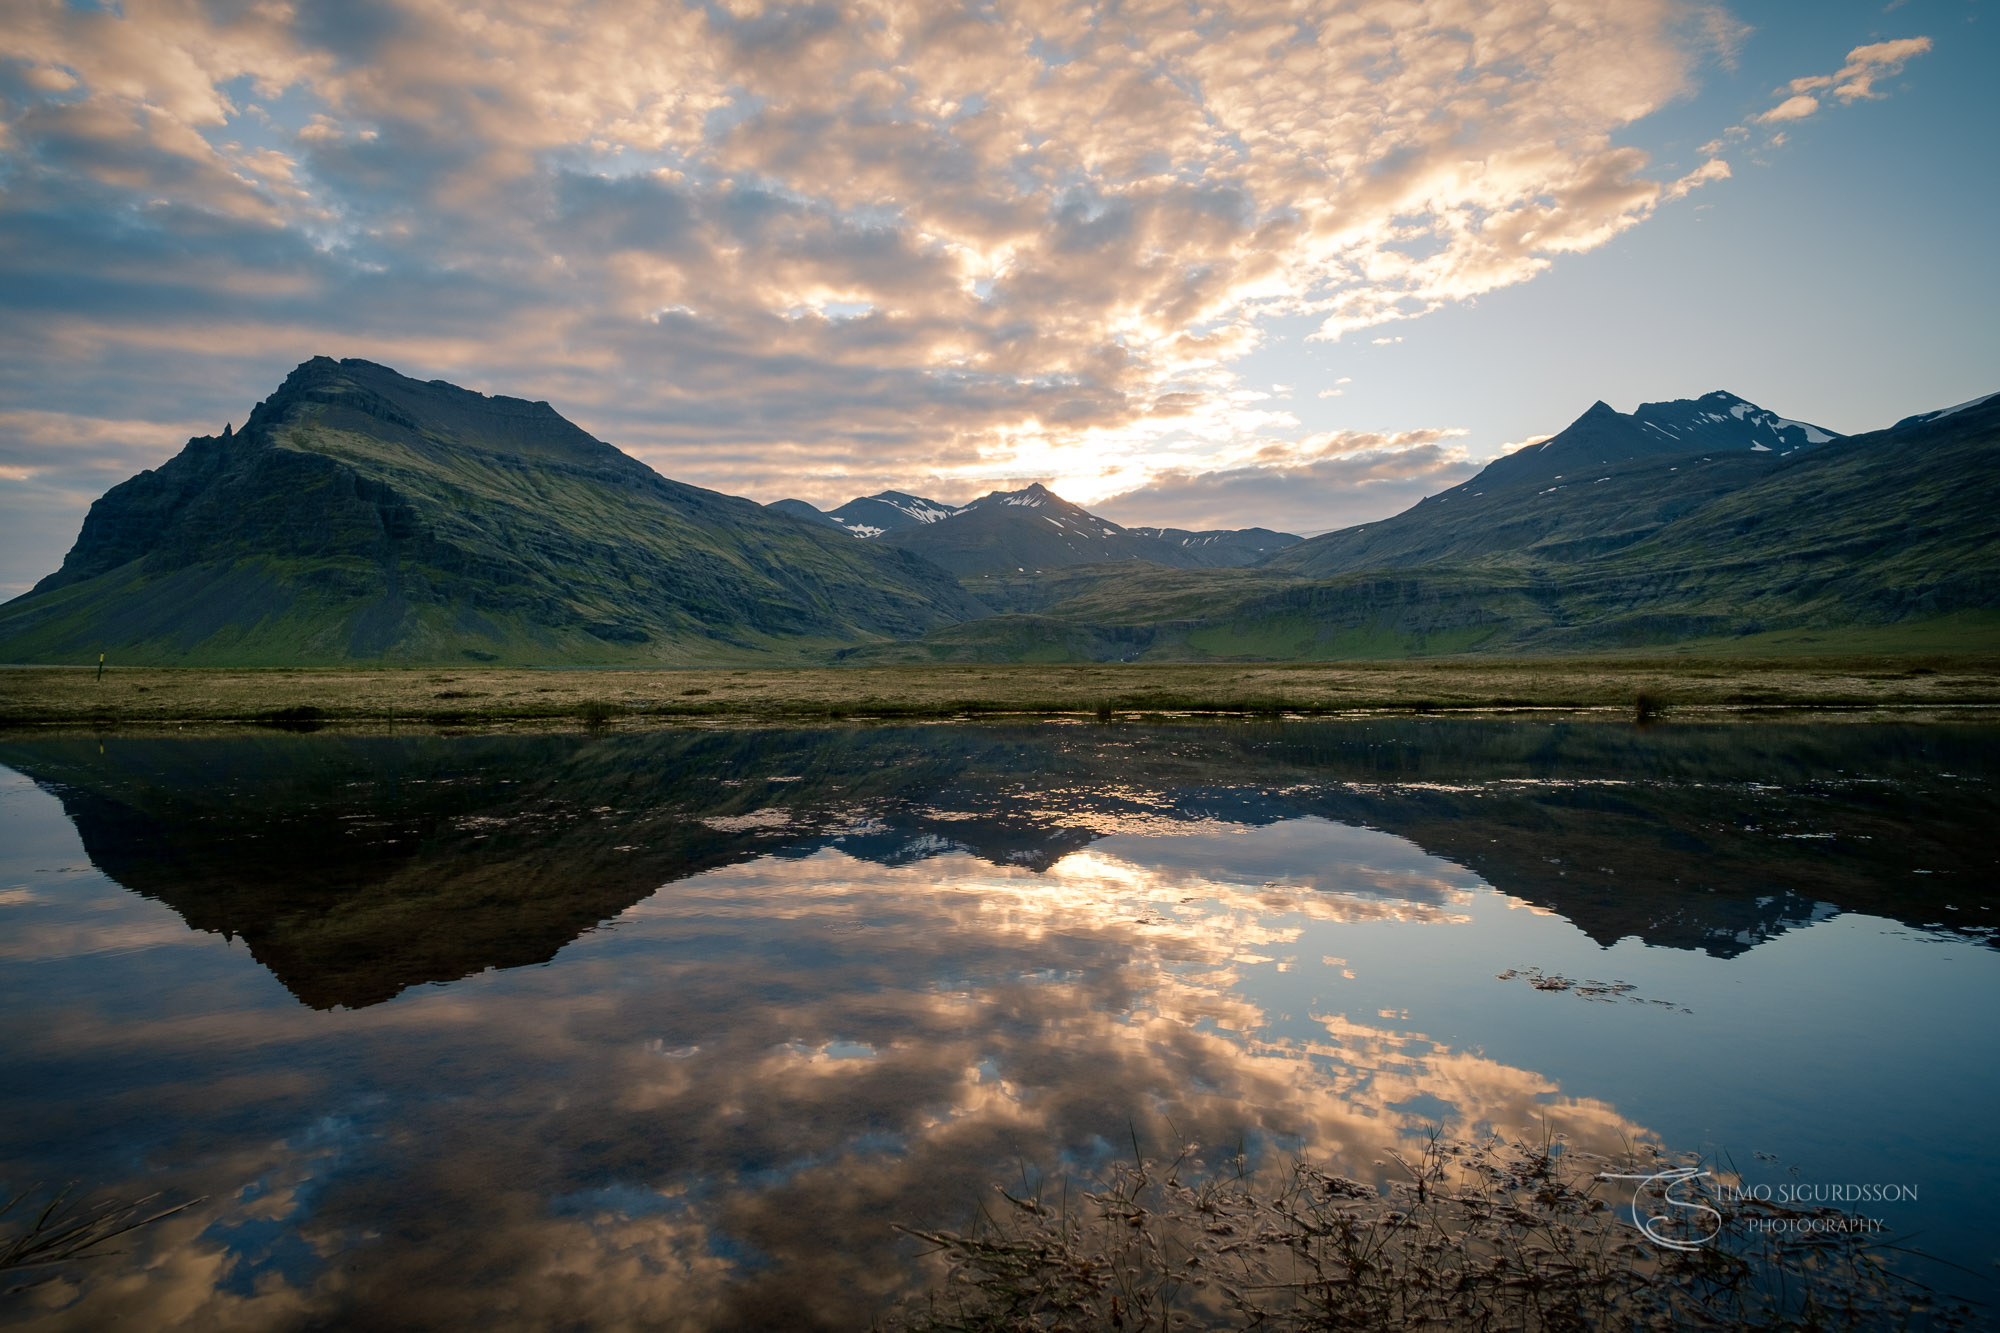 Southeast Iceland. Sky at dusk. Mountains. Reflections.